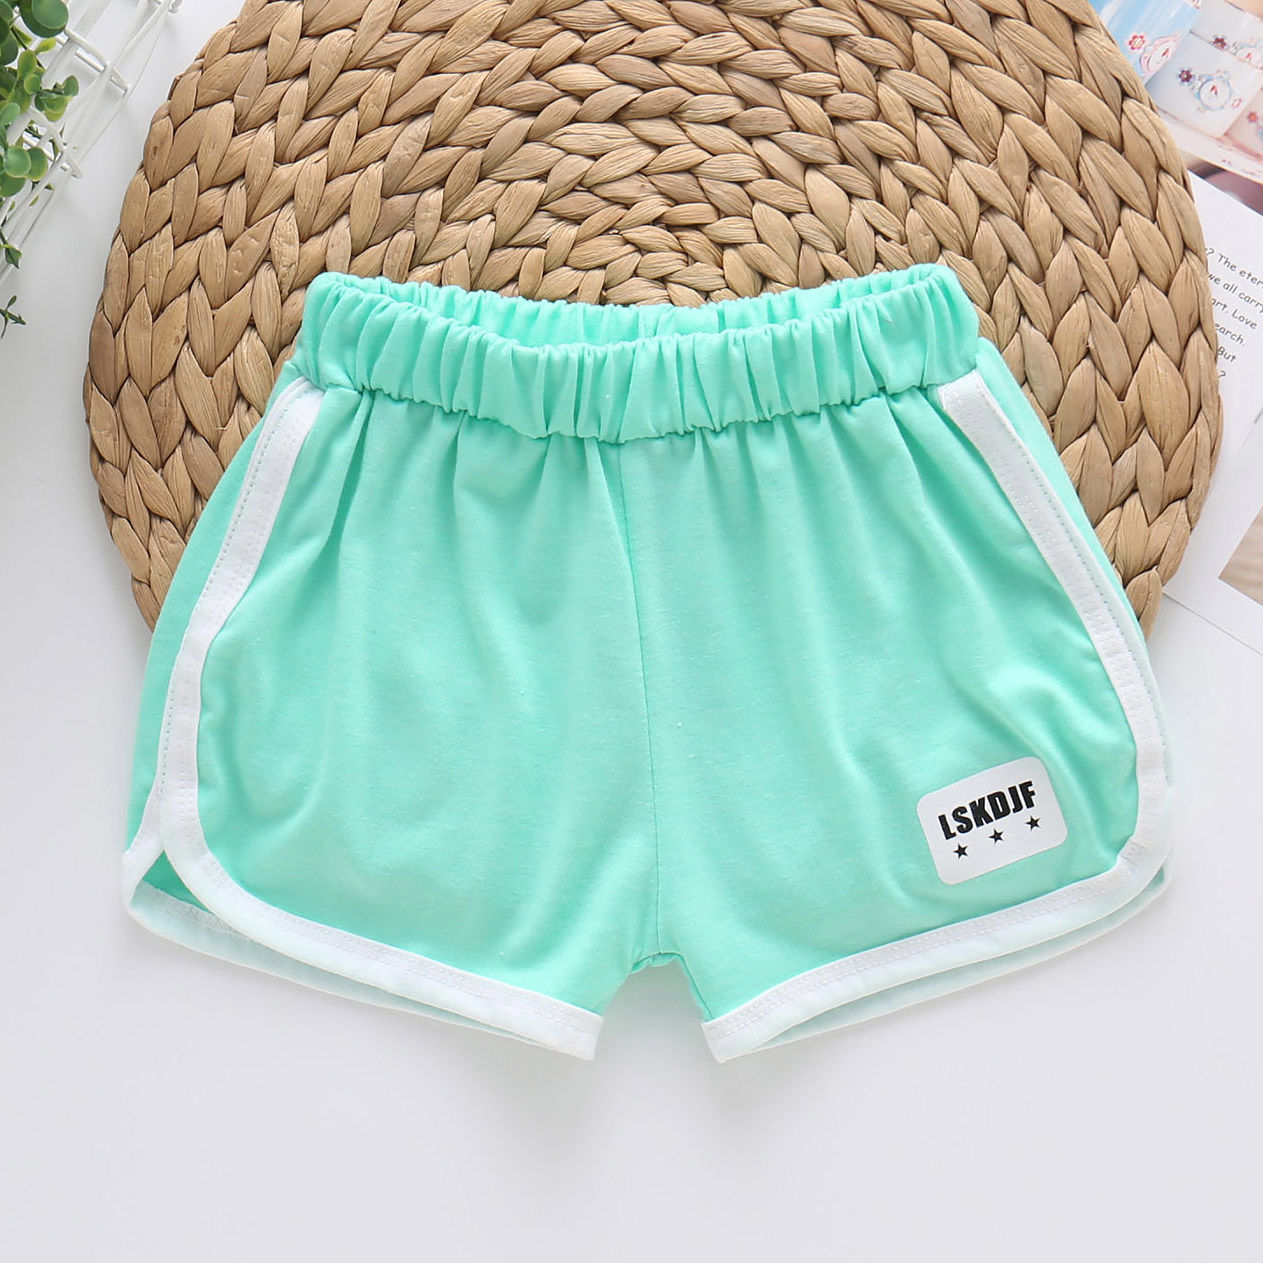 Children's cotton Summer Shorts for boys and girls to wear 0-10 years old children's pants for leisure sports